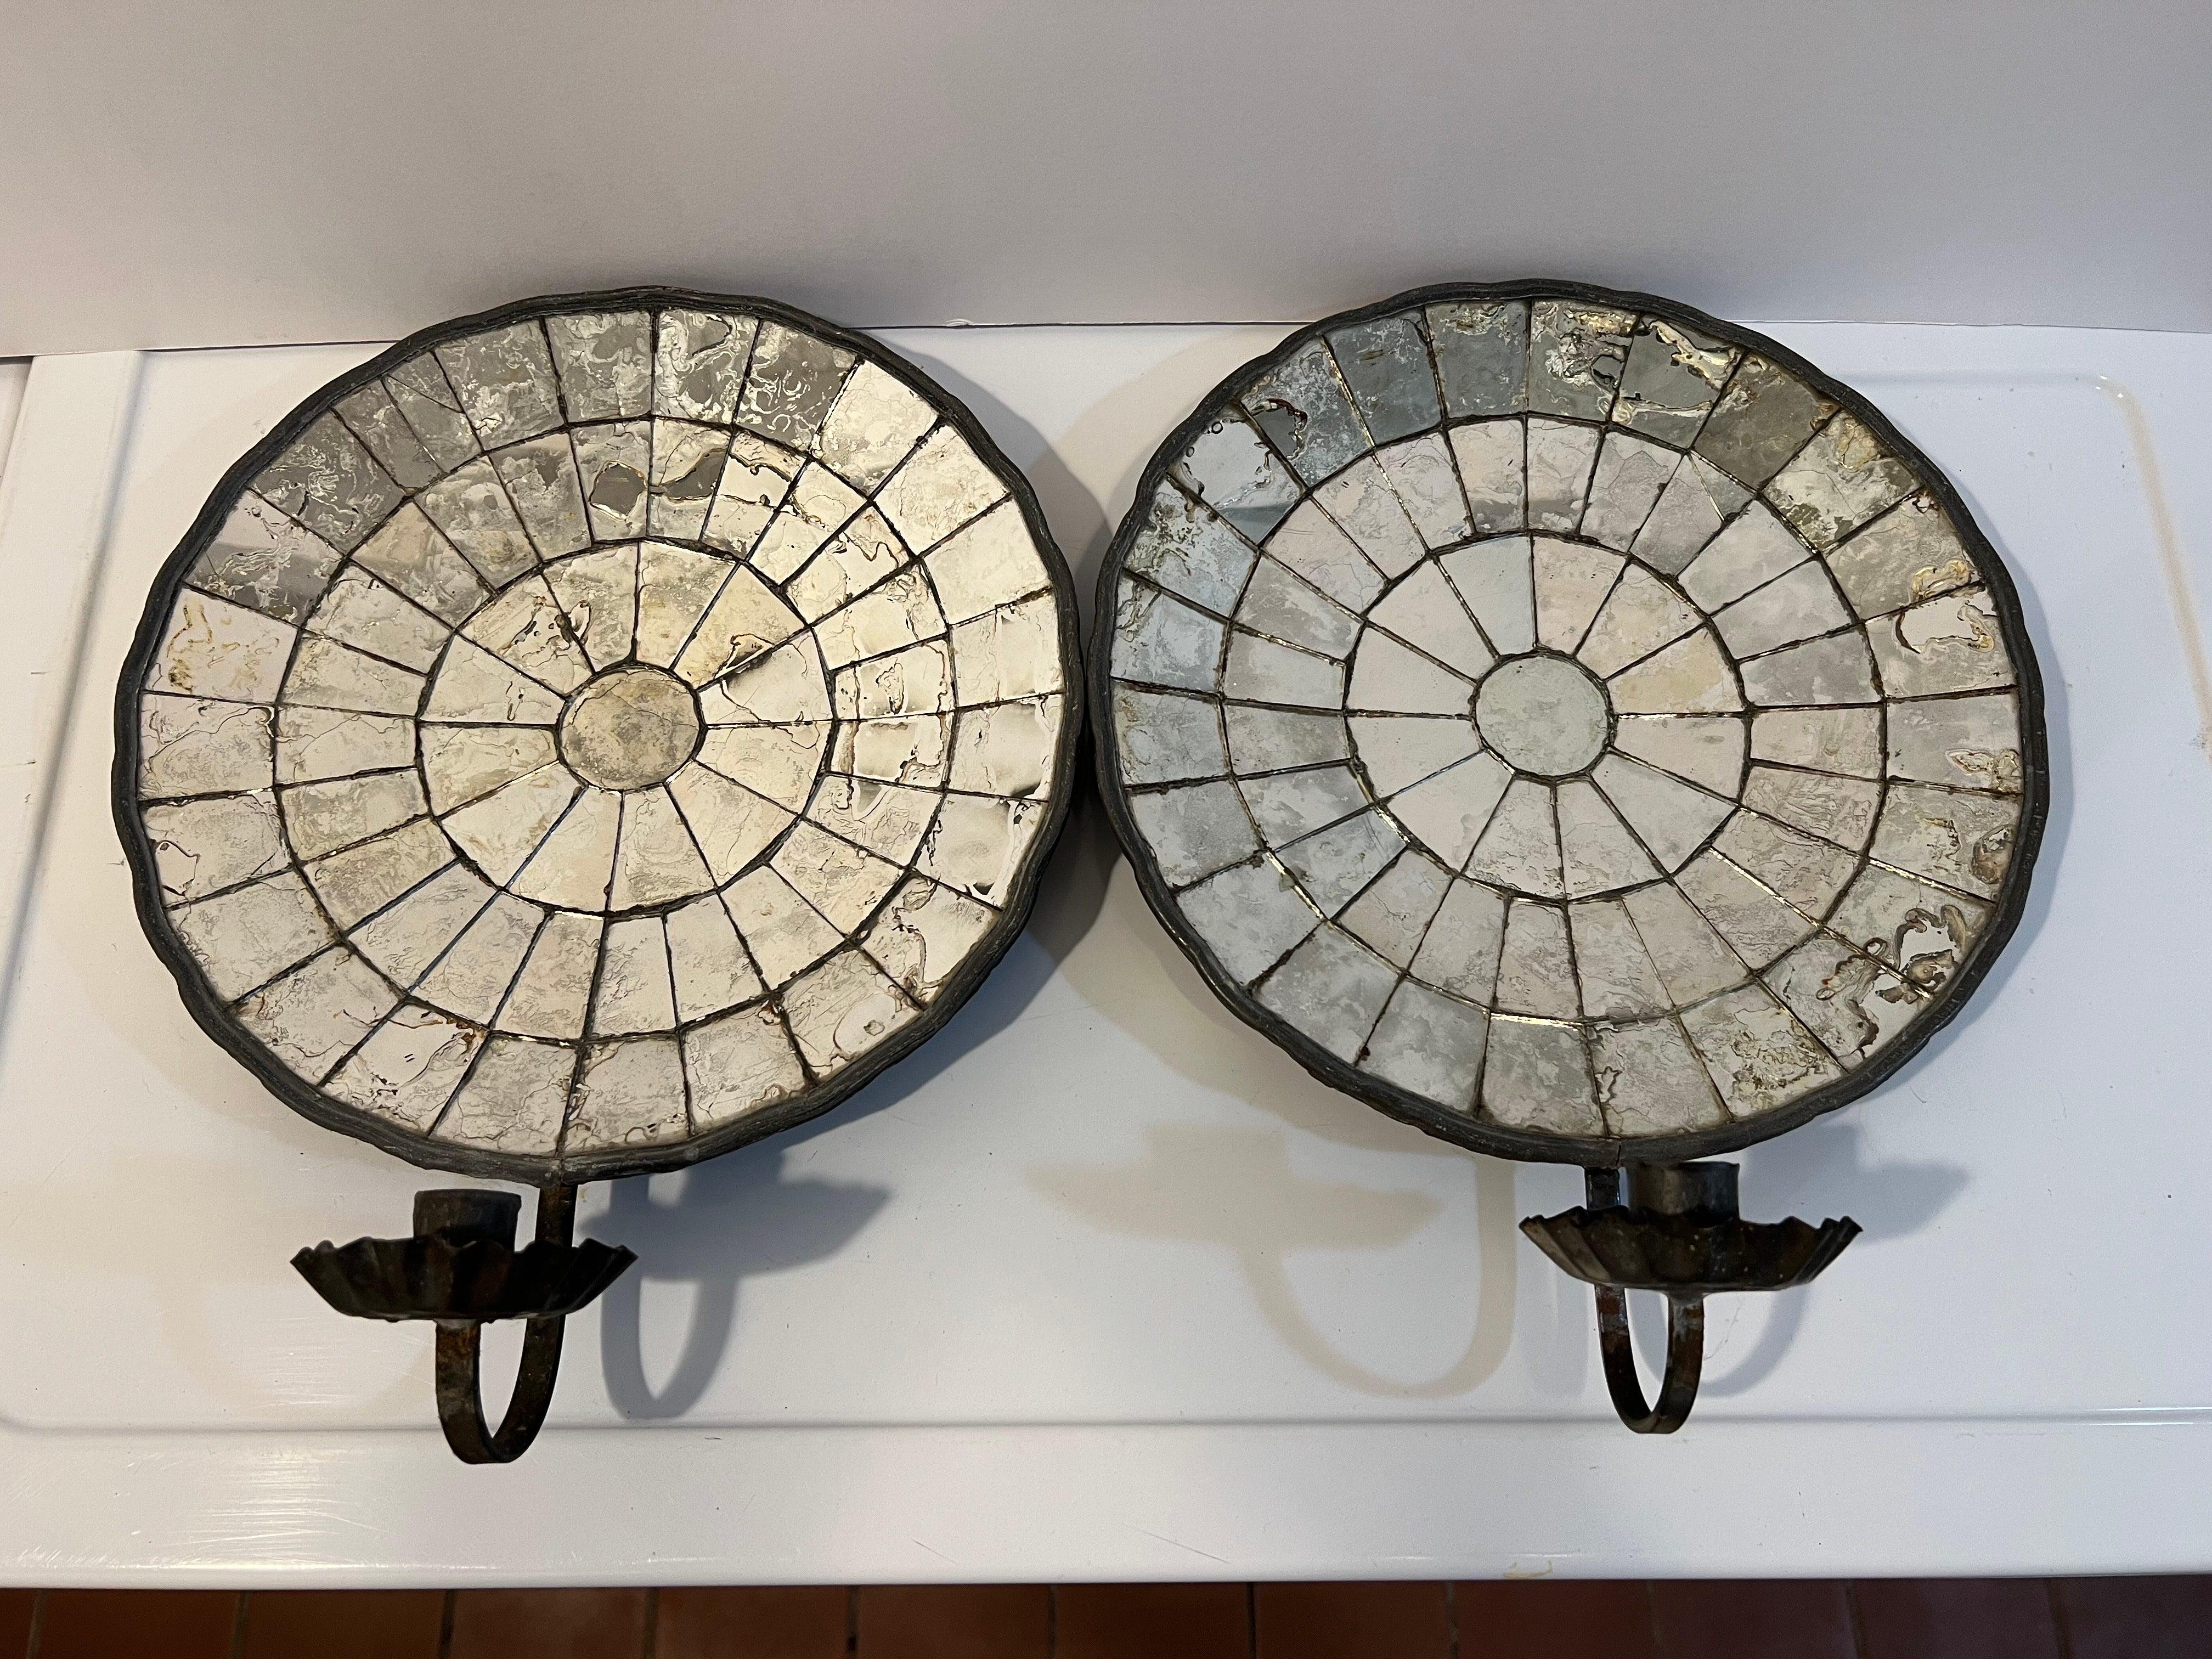 Pair of Early American Reflective candle sconces. Composed of early leaded glass and tin with crimped drip pan. Perfect for that candlelight ambience. Can be electrified if desired.
Large Round mirrored backs give off a very decorative design and